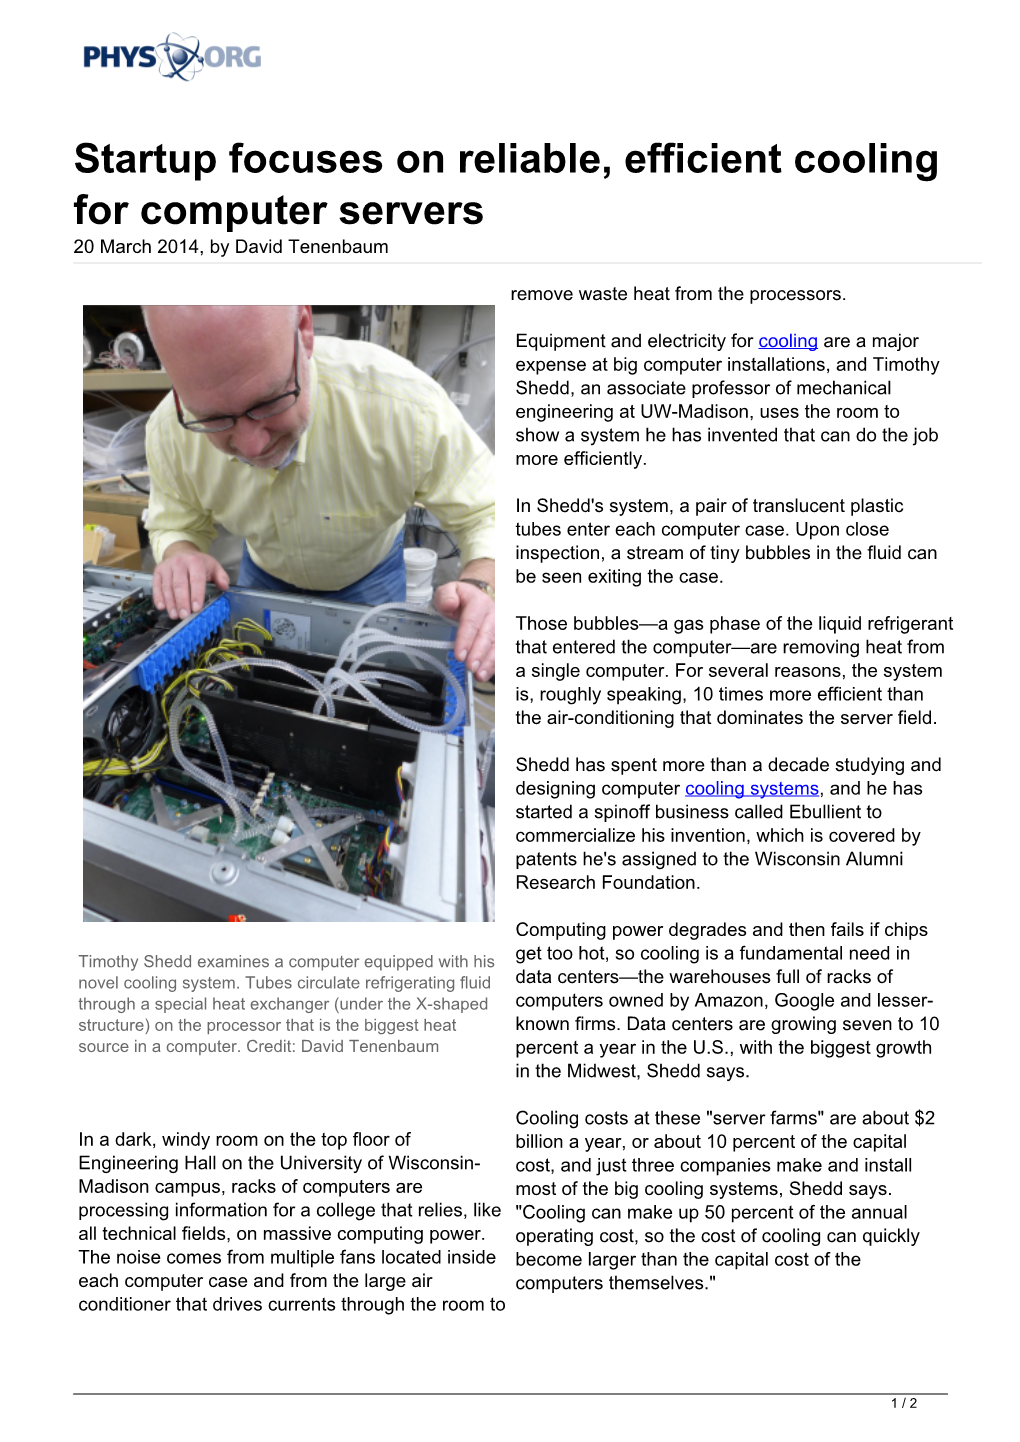 Startup Focuses on Reliable, Efficient Cooling for Computer Servers 20 March 2014, by David Tenenbaum